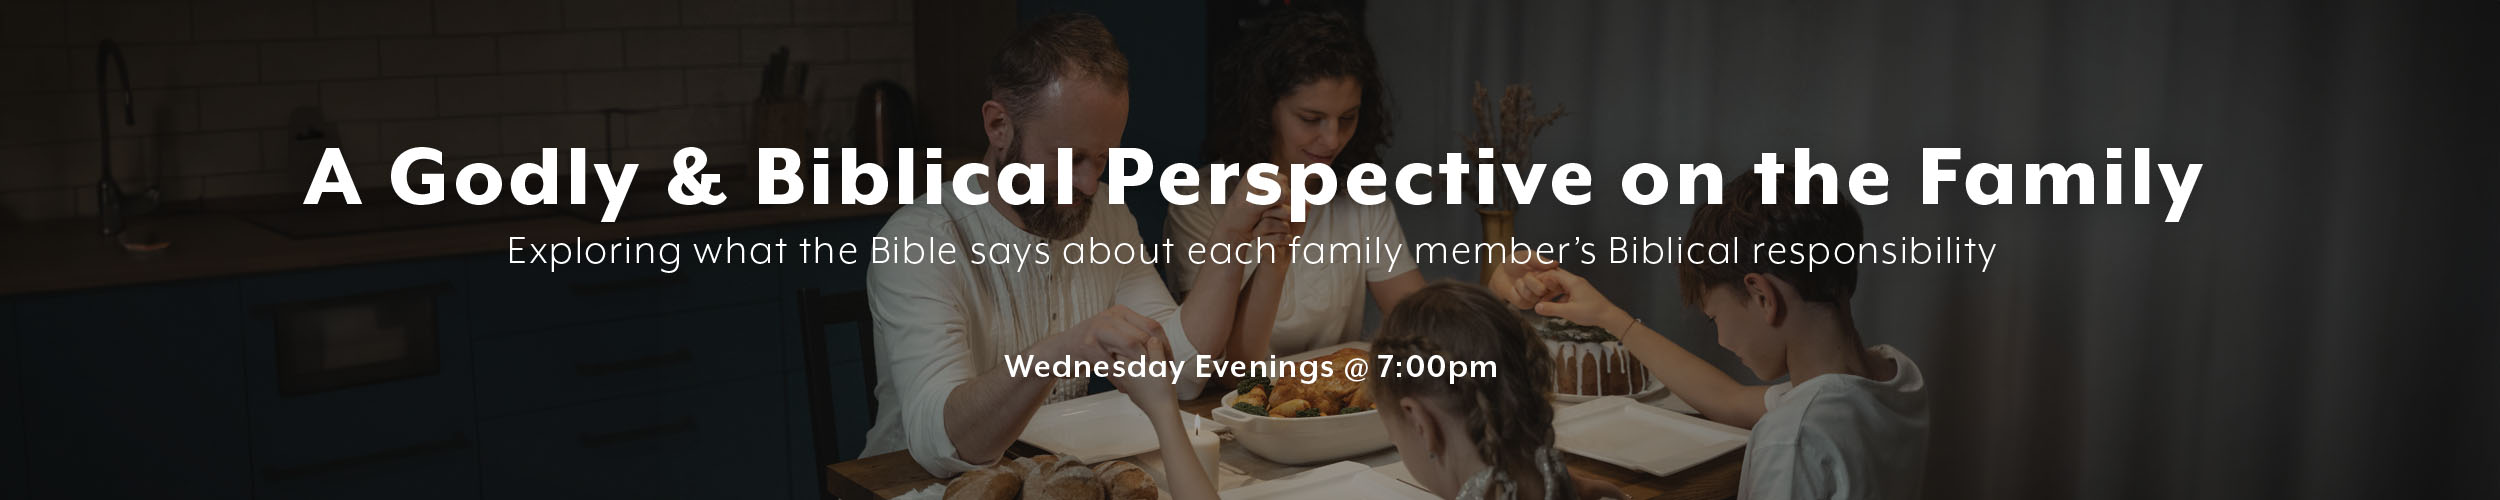 A Godly & Biblical Perspective on the Family: Exploring what the Bible says about each family member’s Biblical responsibility. Wednesdays at 7:00pm